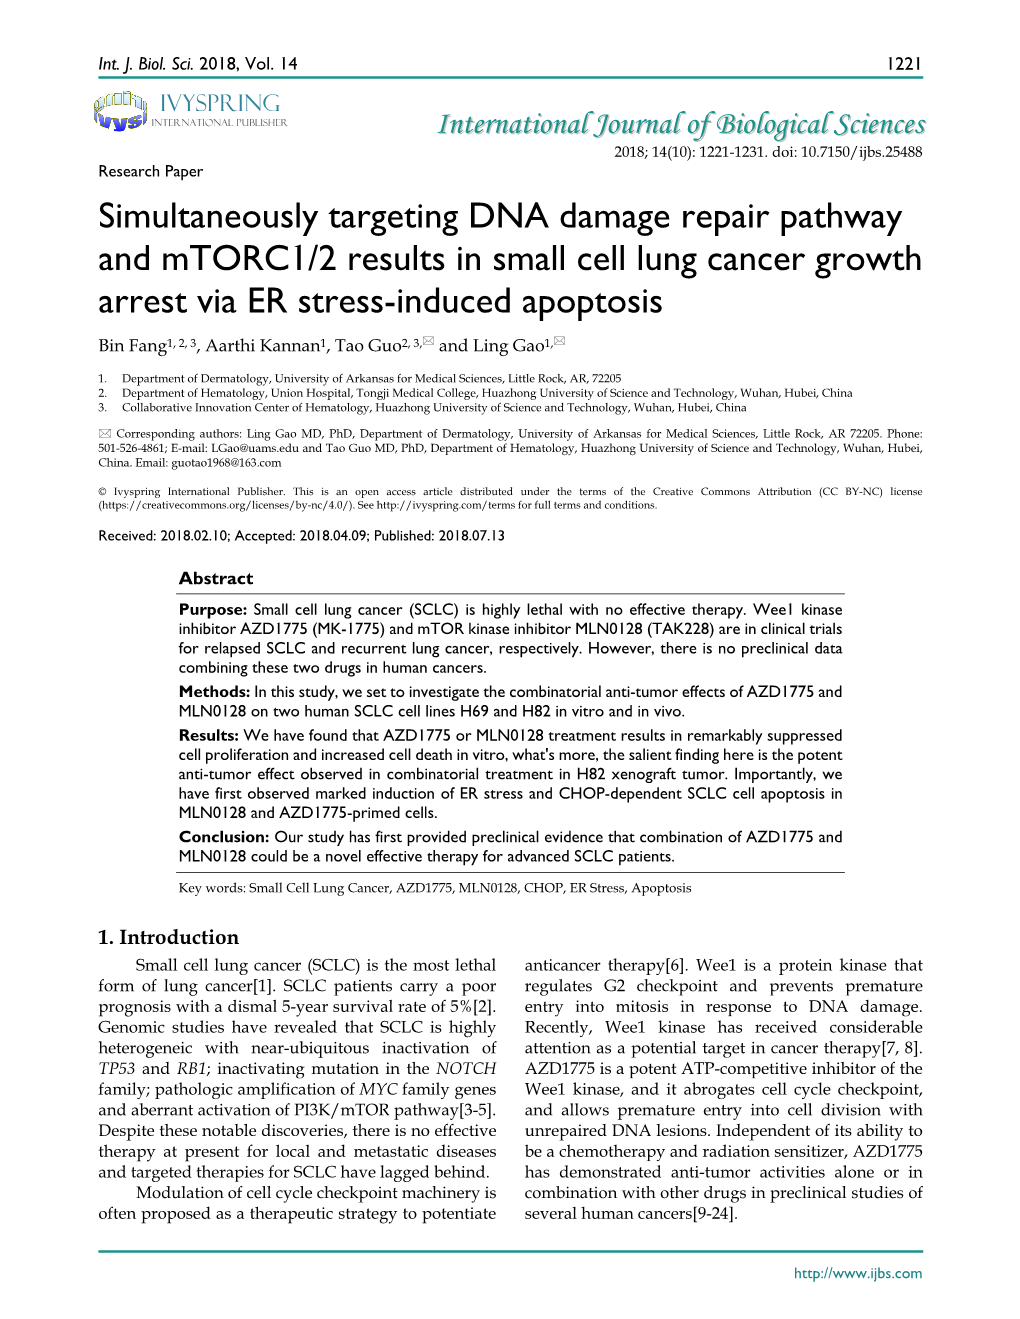 Simultaneously Targeting DNA Damage Repair Pathway And